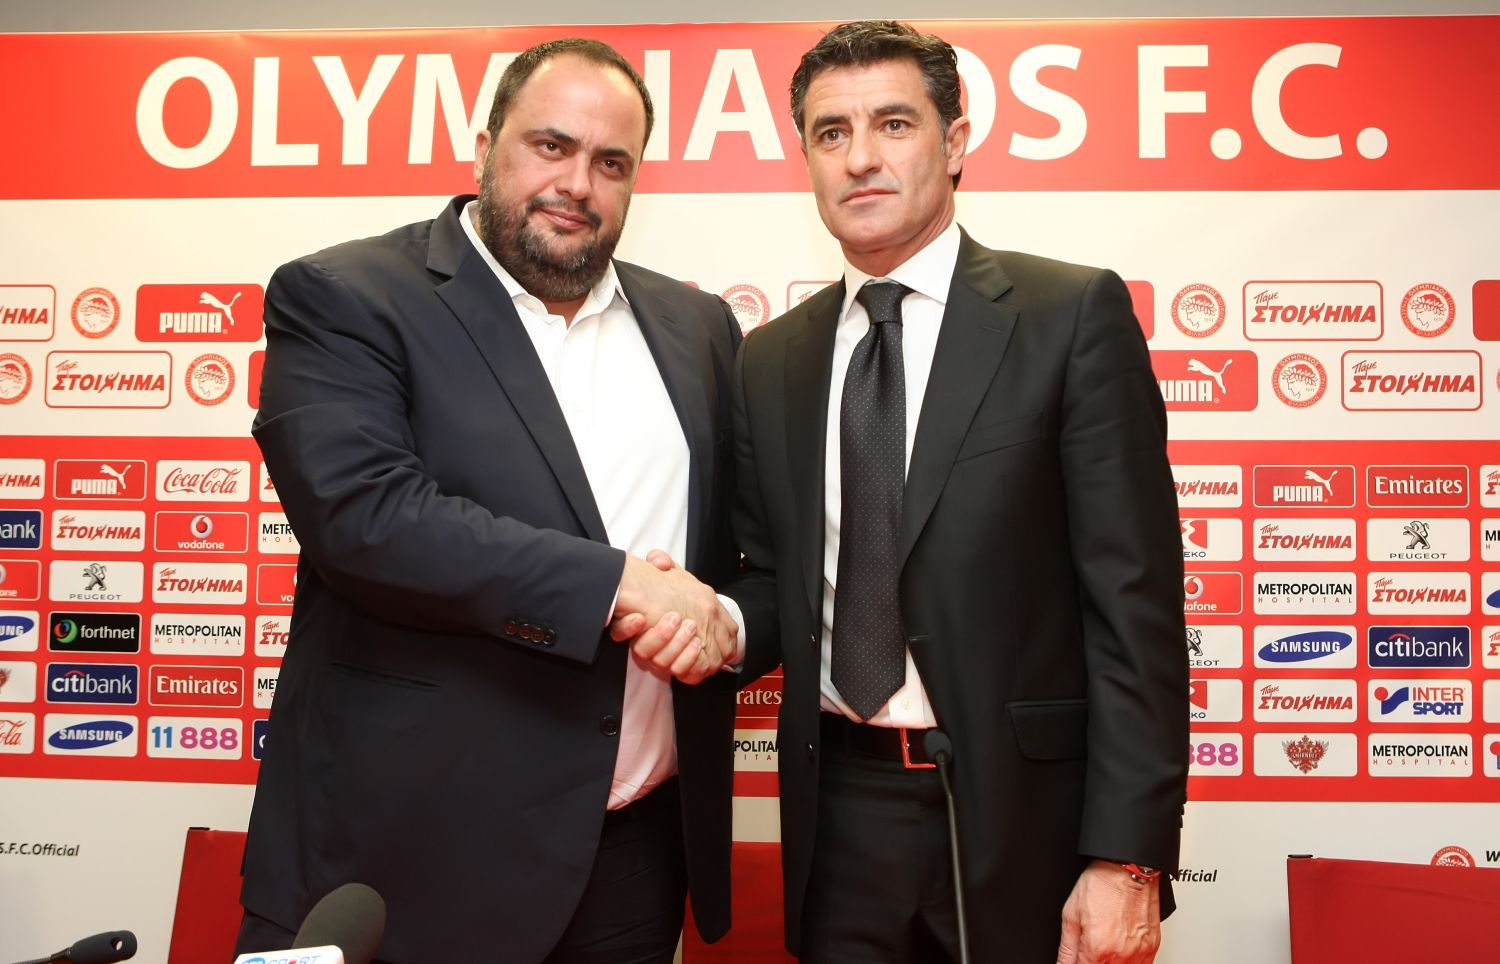 The era of Michel starts in Olympiacos